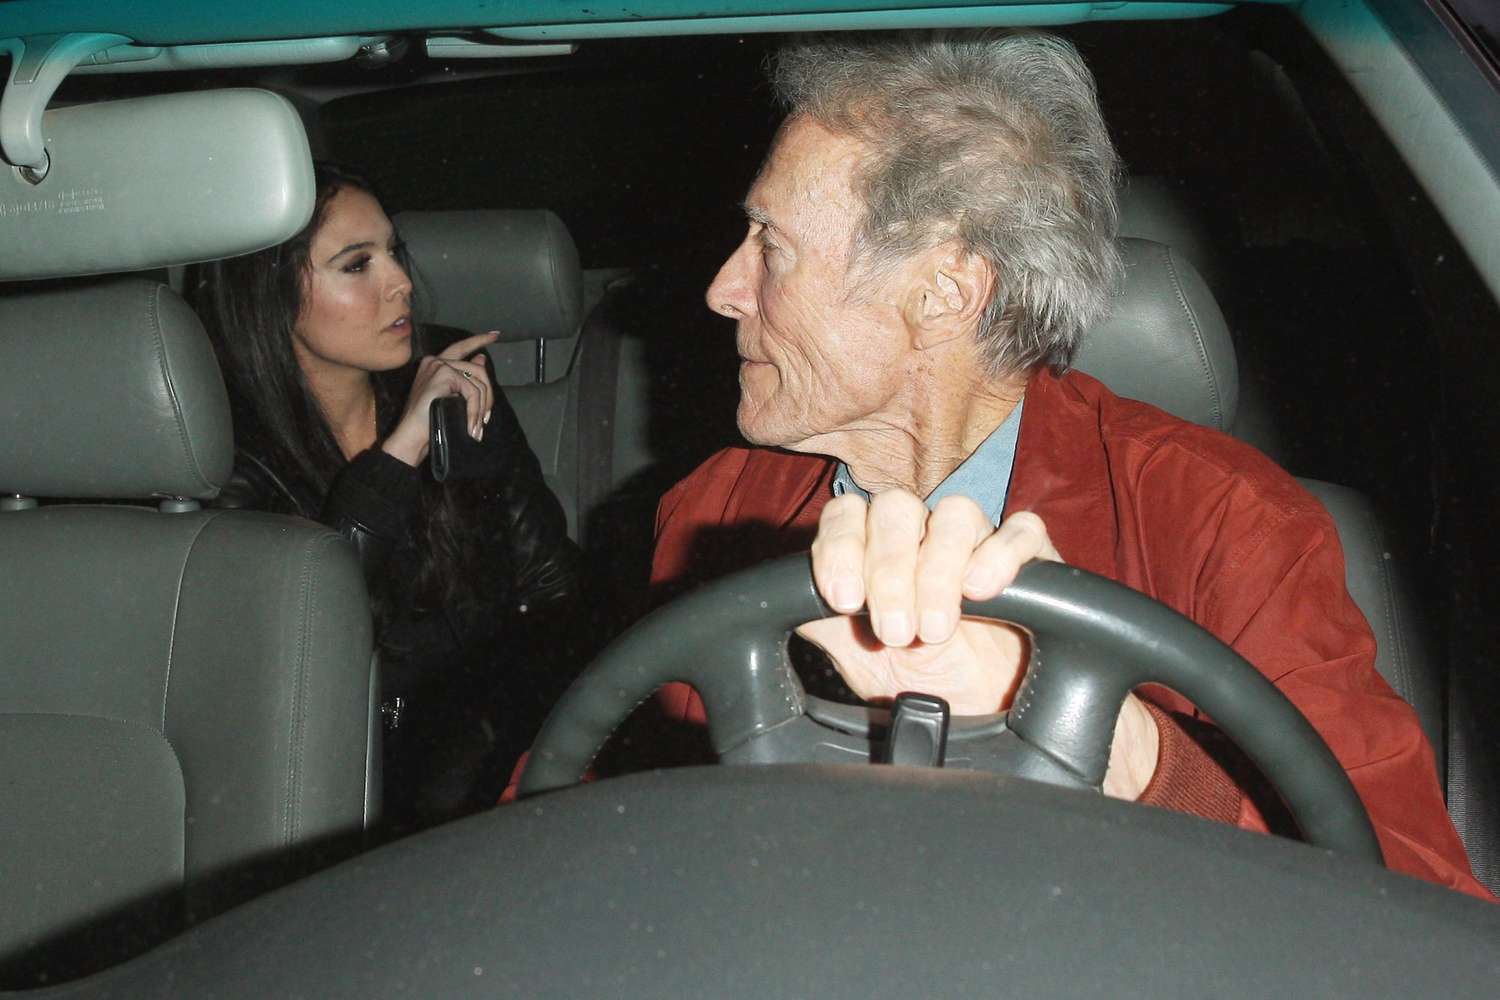 Actor Clint Eastwood (88) is spotted leaving LA hot spot Craig's with Mick Jagger's former fling Noor Alfallah, 23